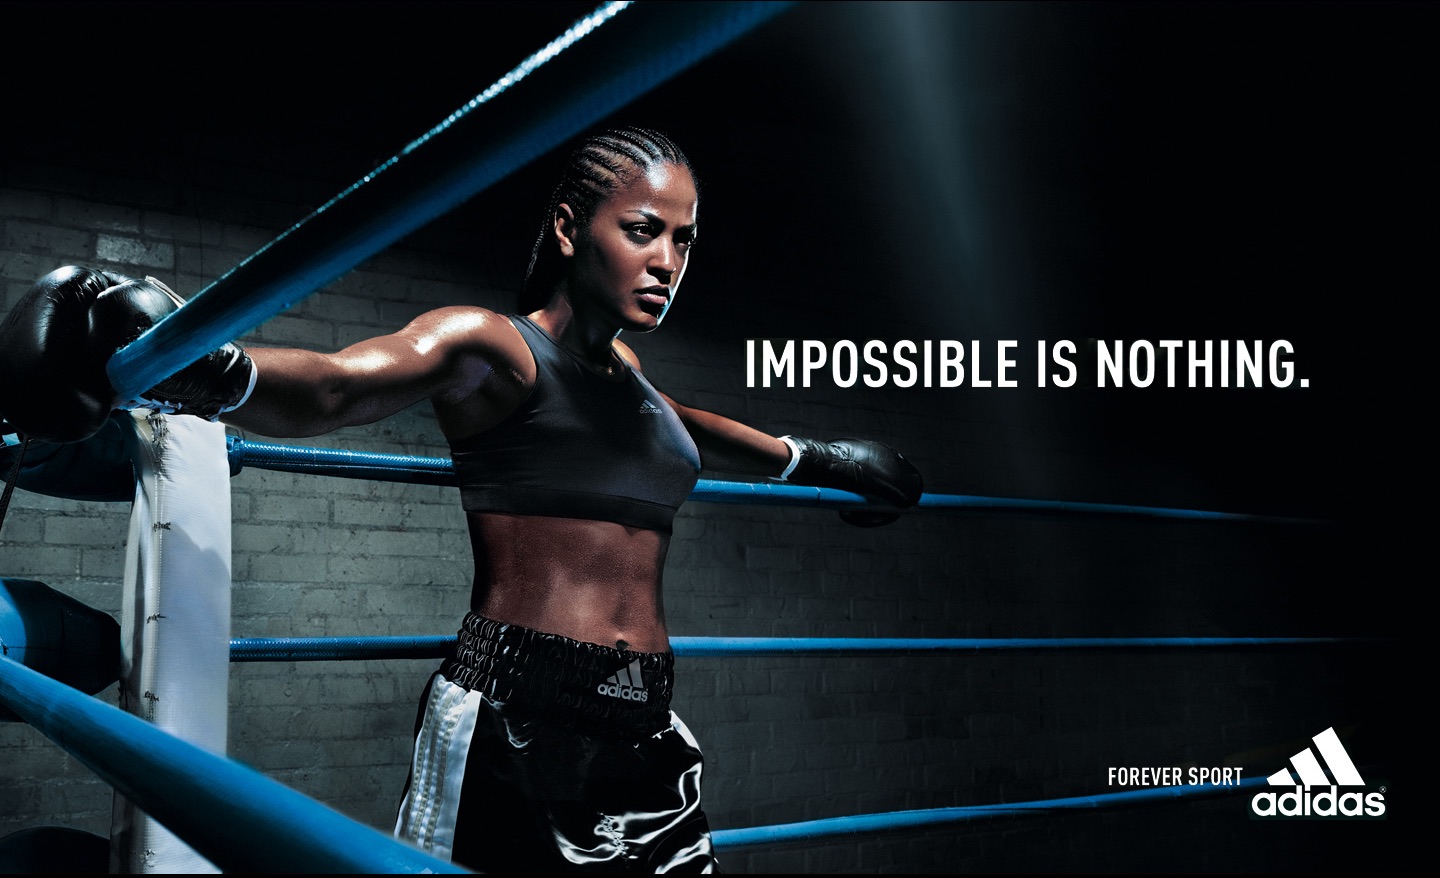 Adidas' "Impossible Is Nothing" slogan